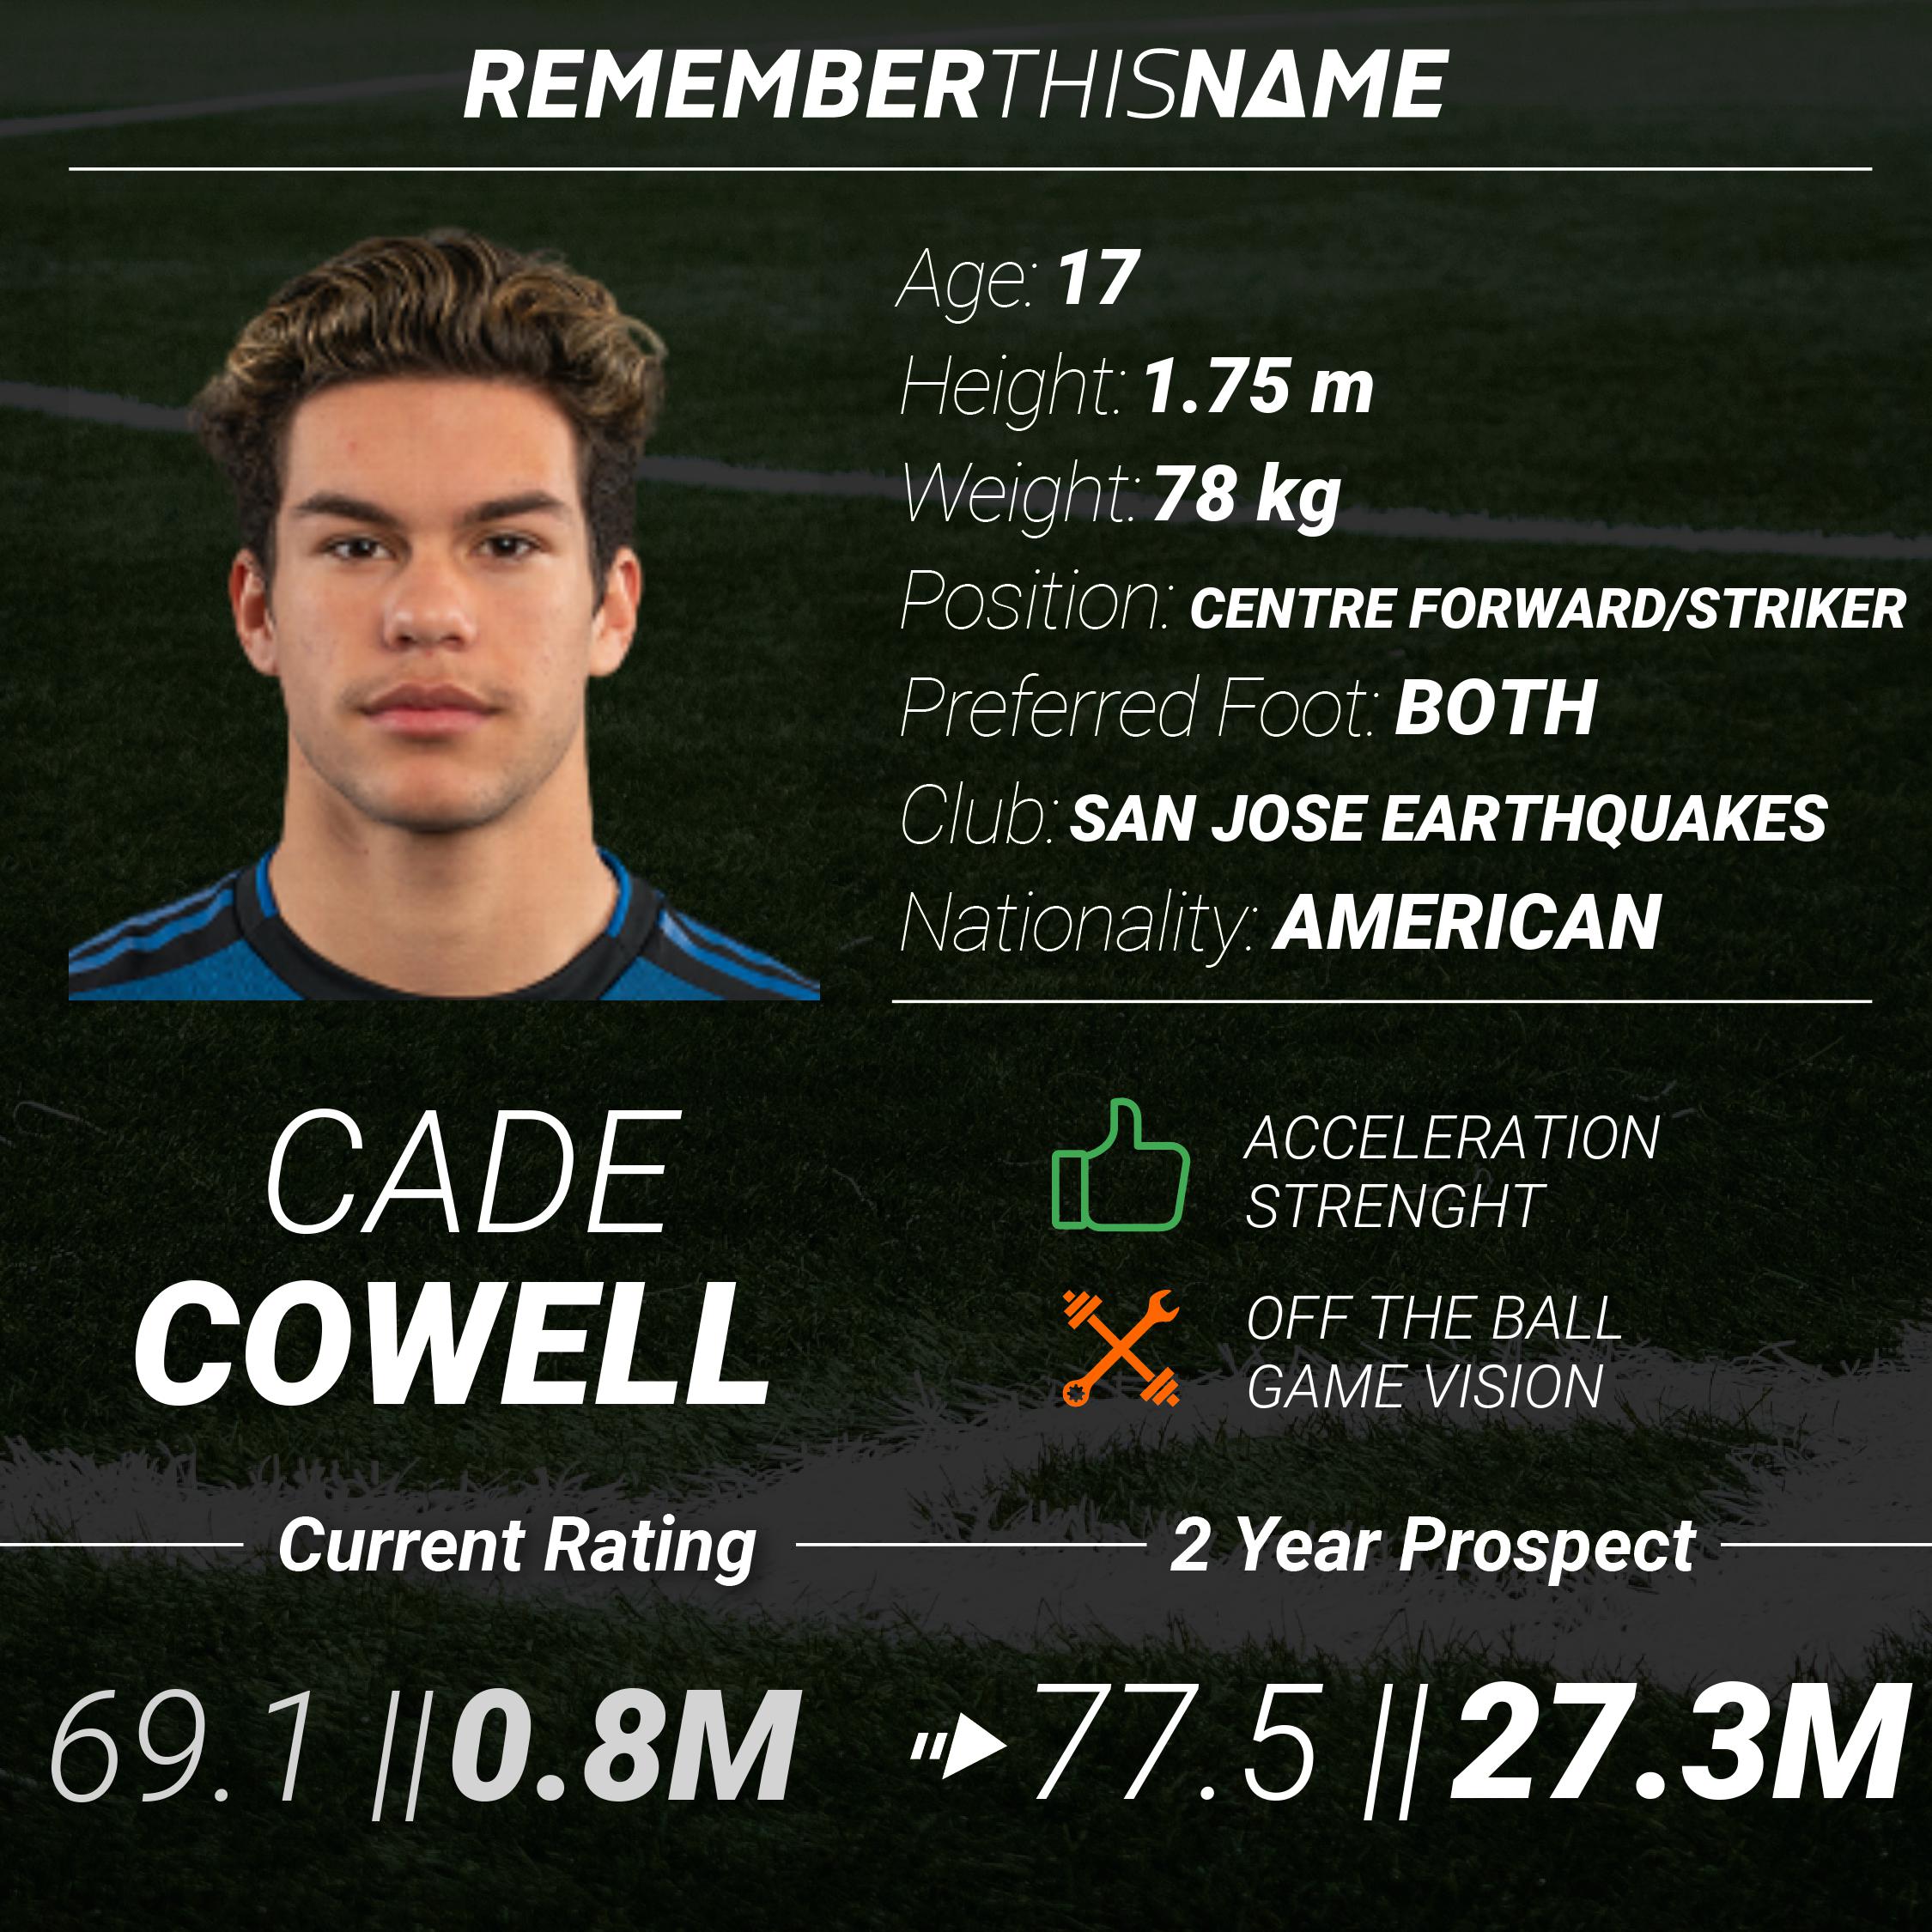 /img/cards/Cade_Cowell_RTN_Scouting.jpg